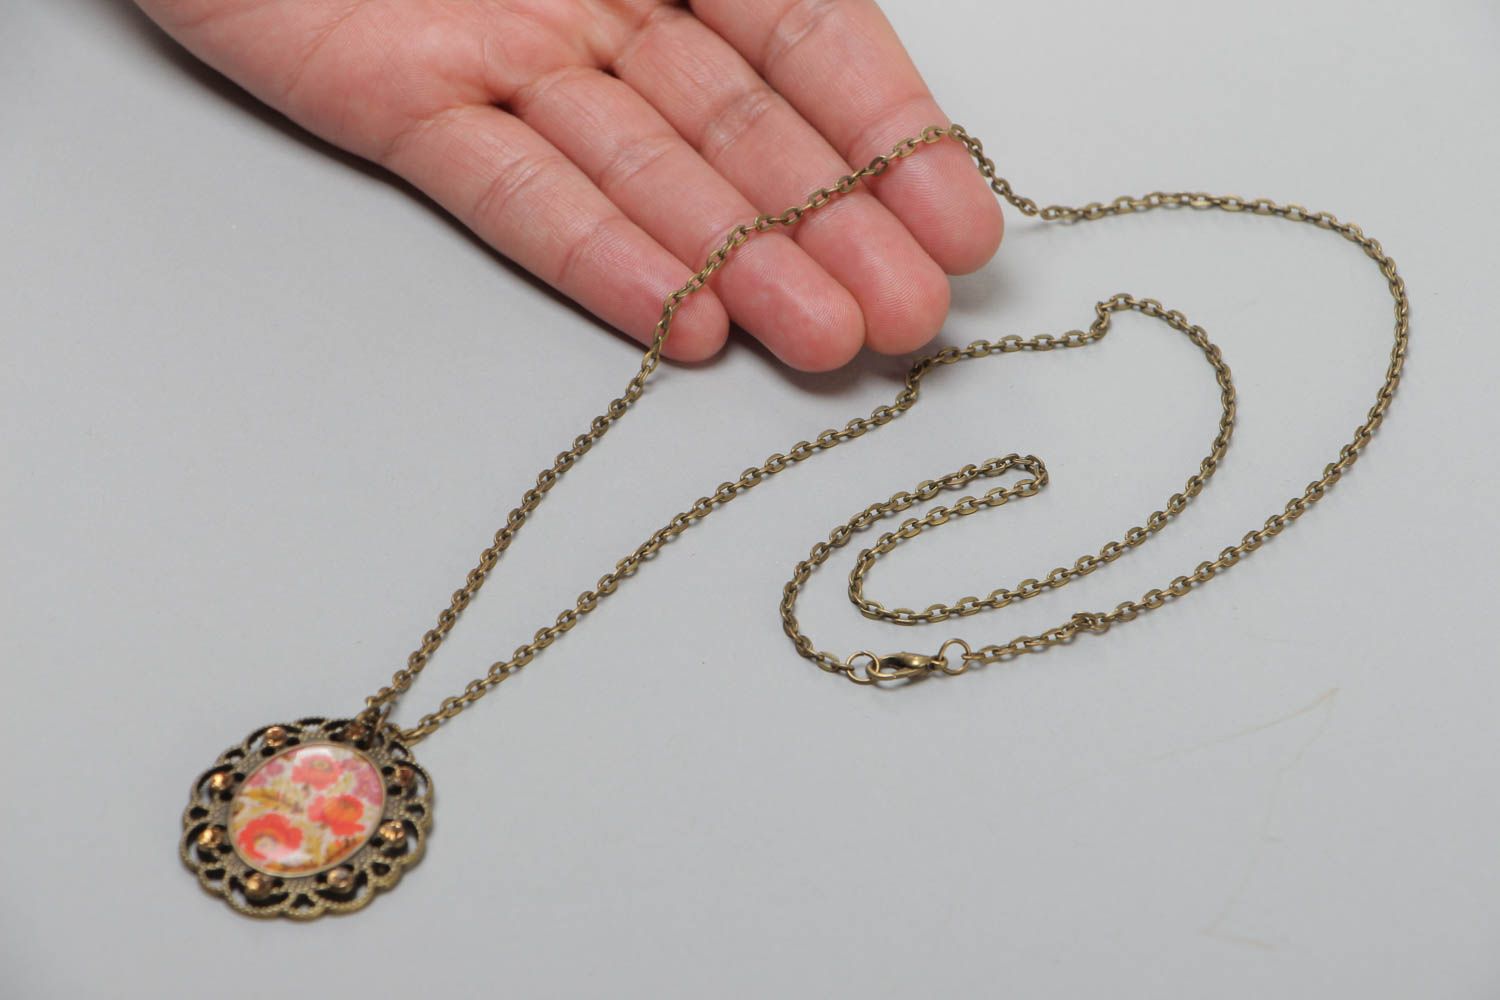 Handmade vintage metal pendant with floral image and glass glaze on chain 700 mm photo 5